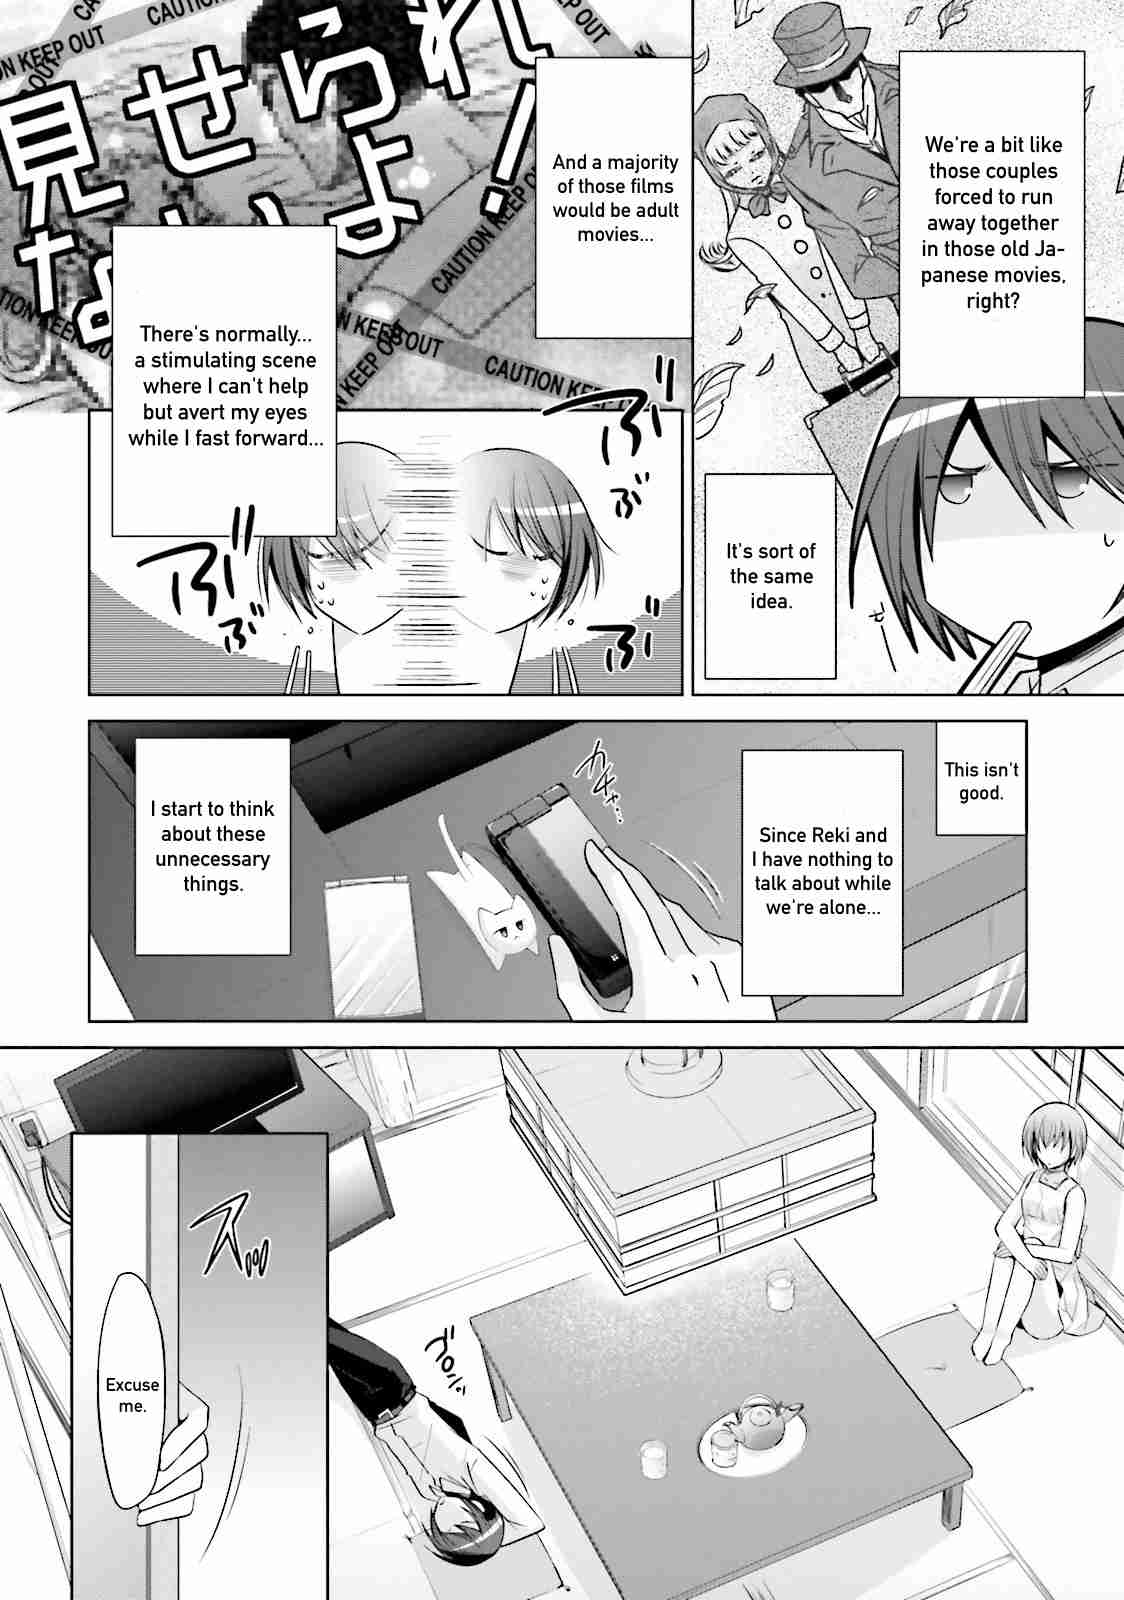 Hidan no Aria Vol. 14 Ch. 78 Moment of Relaxation